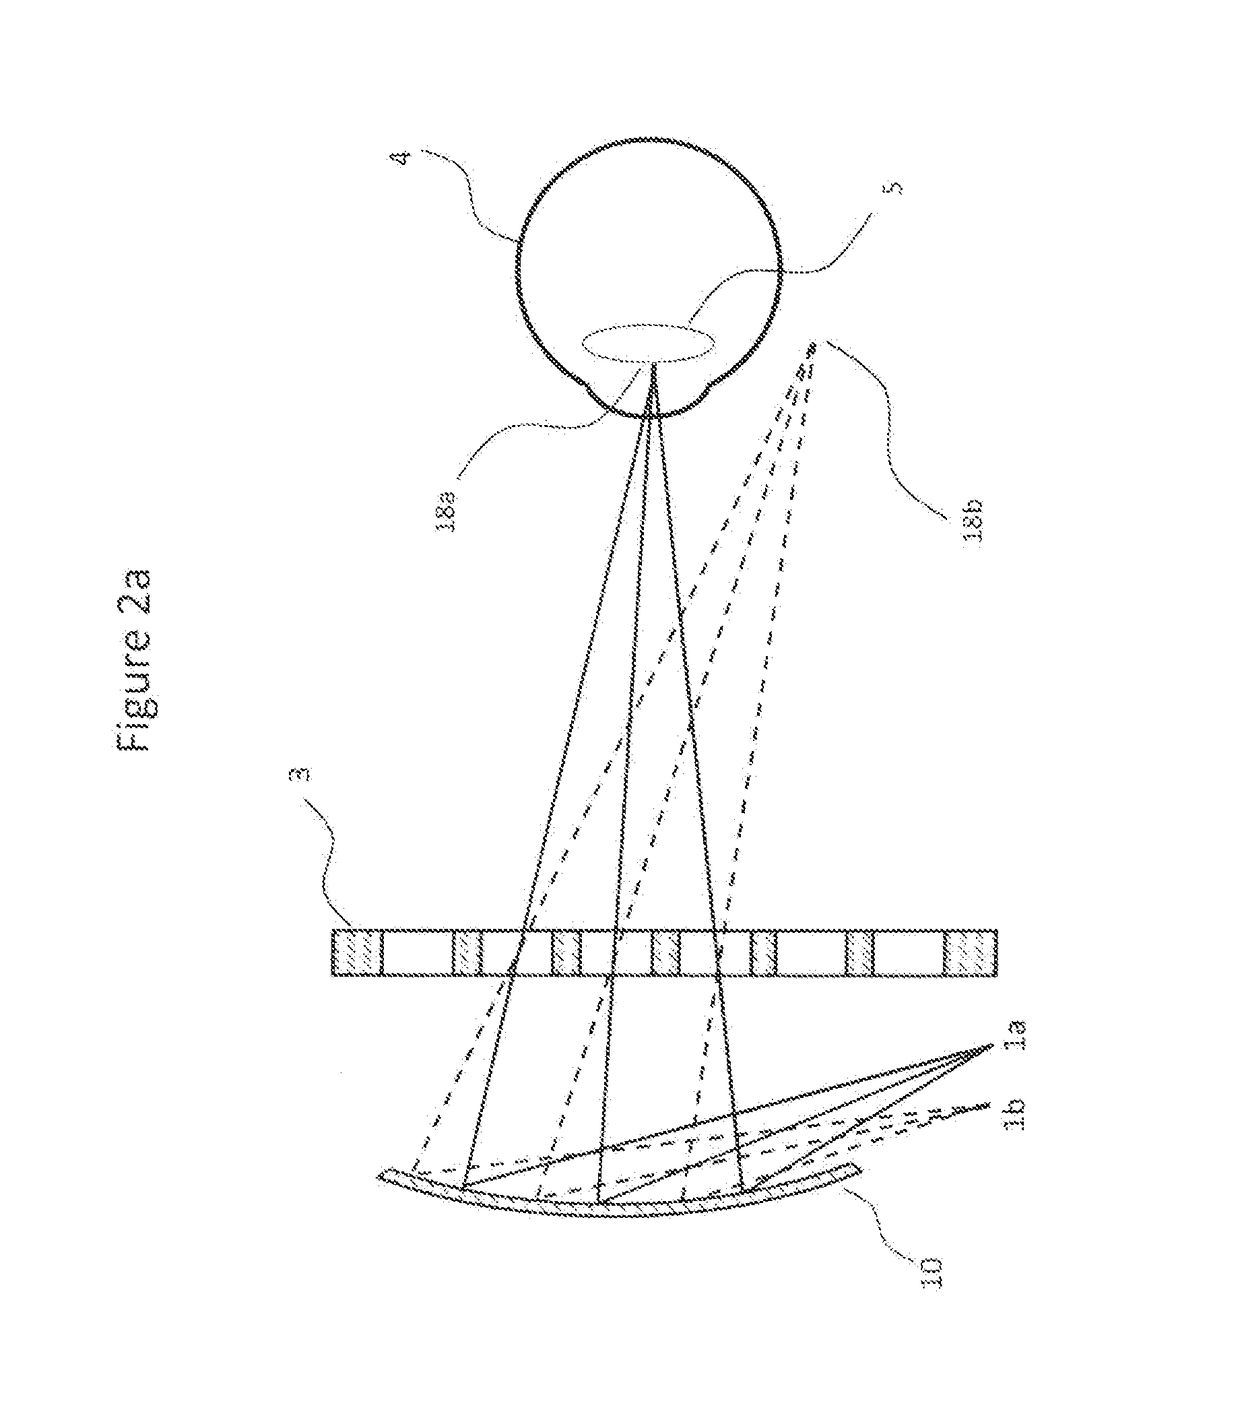 Head mounted display with directional panel illumination unit